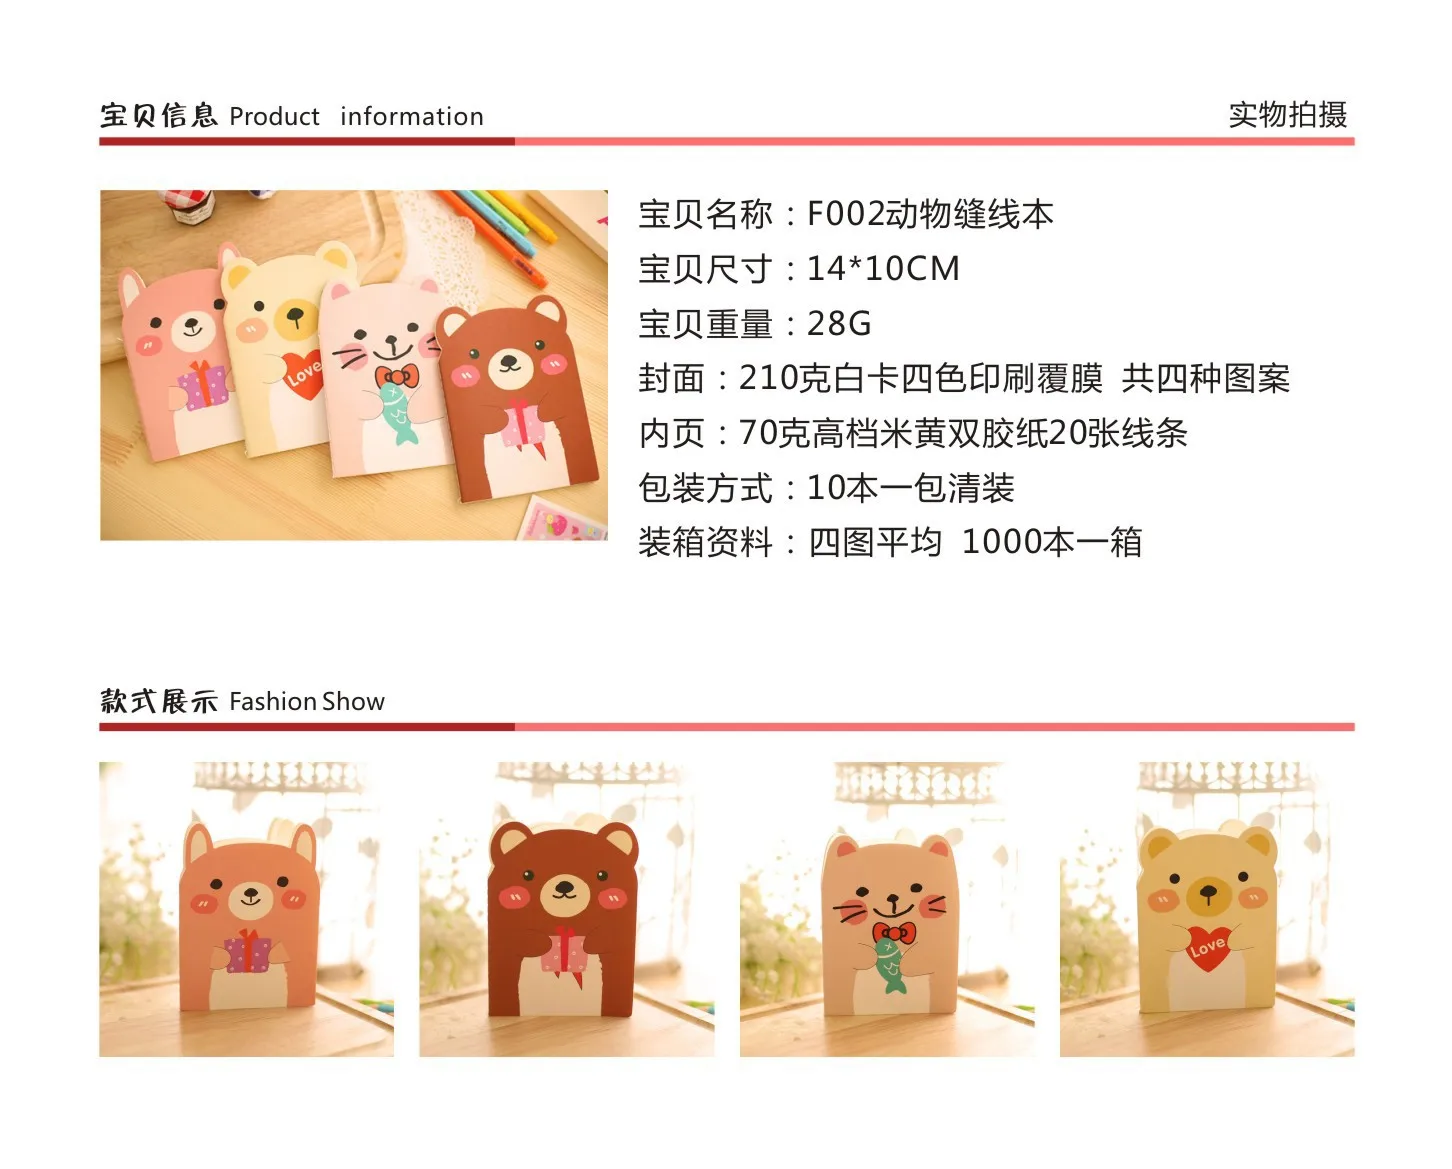 Cute Small Bear Memo Pad Kawaii Stationery N Times Sticky Notes Portable Notepad School Office Supply Buy Cute Small Bear Memo Pad Sticky Notes Portable Notepad Product On Alibaba Com